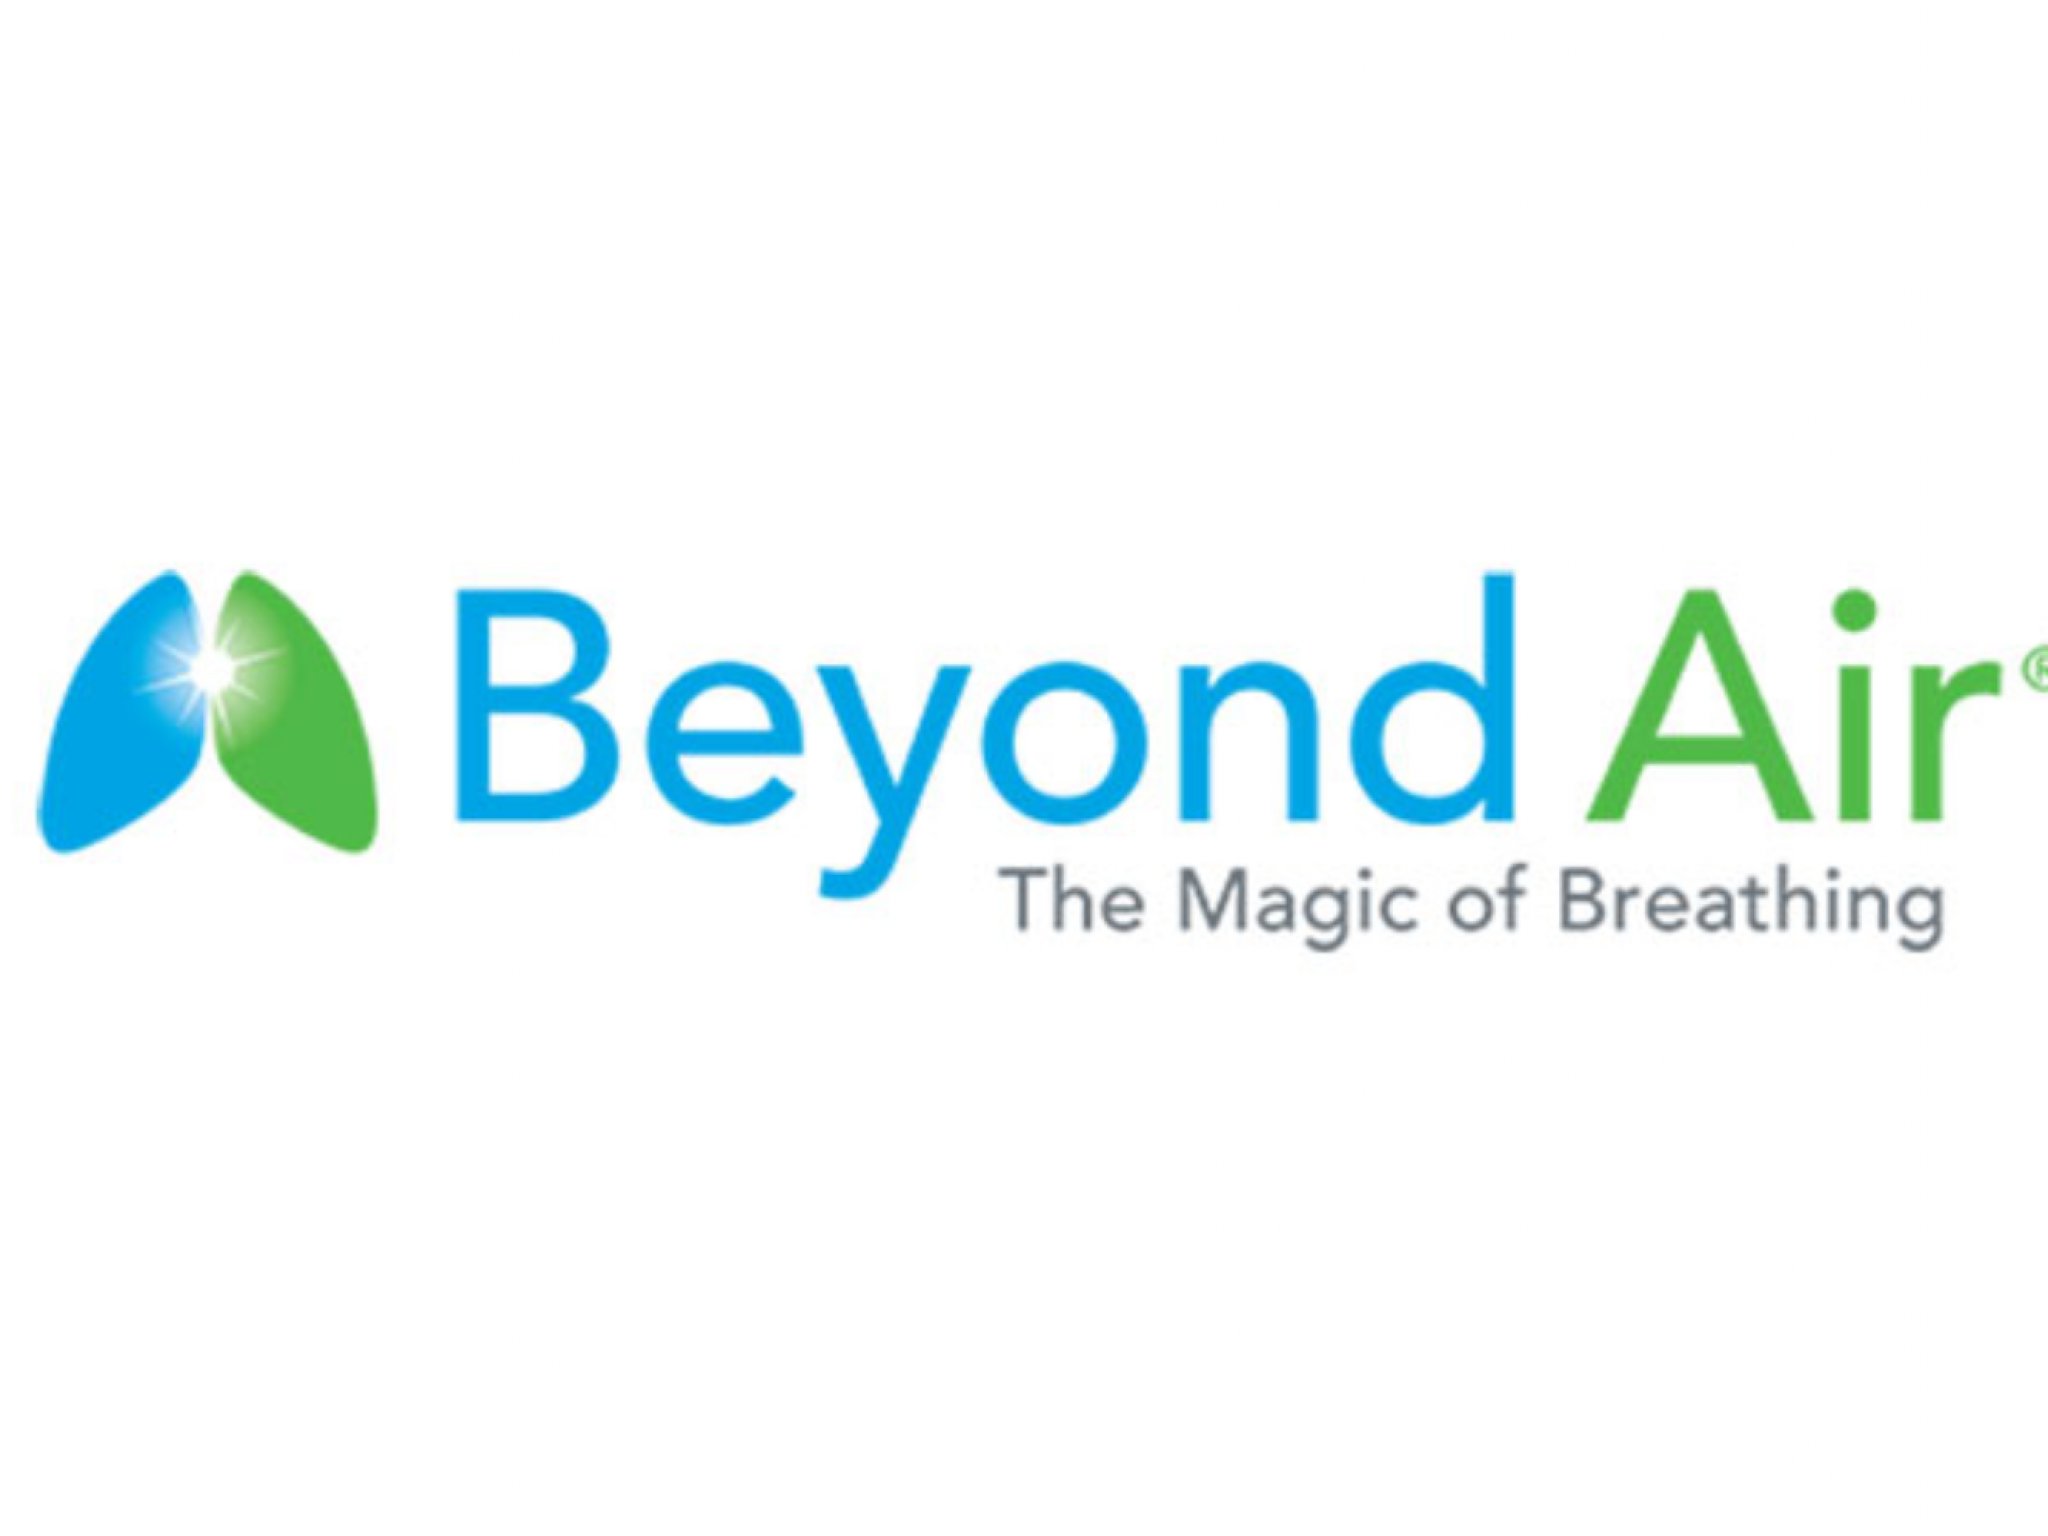  medical-device-player-beyond-airs-subsidiary-reveals-encouraging-data-from-early-stage-cancer-study 